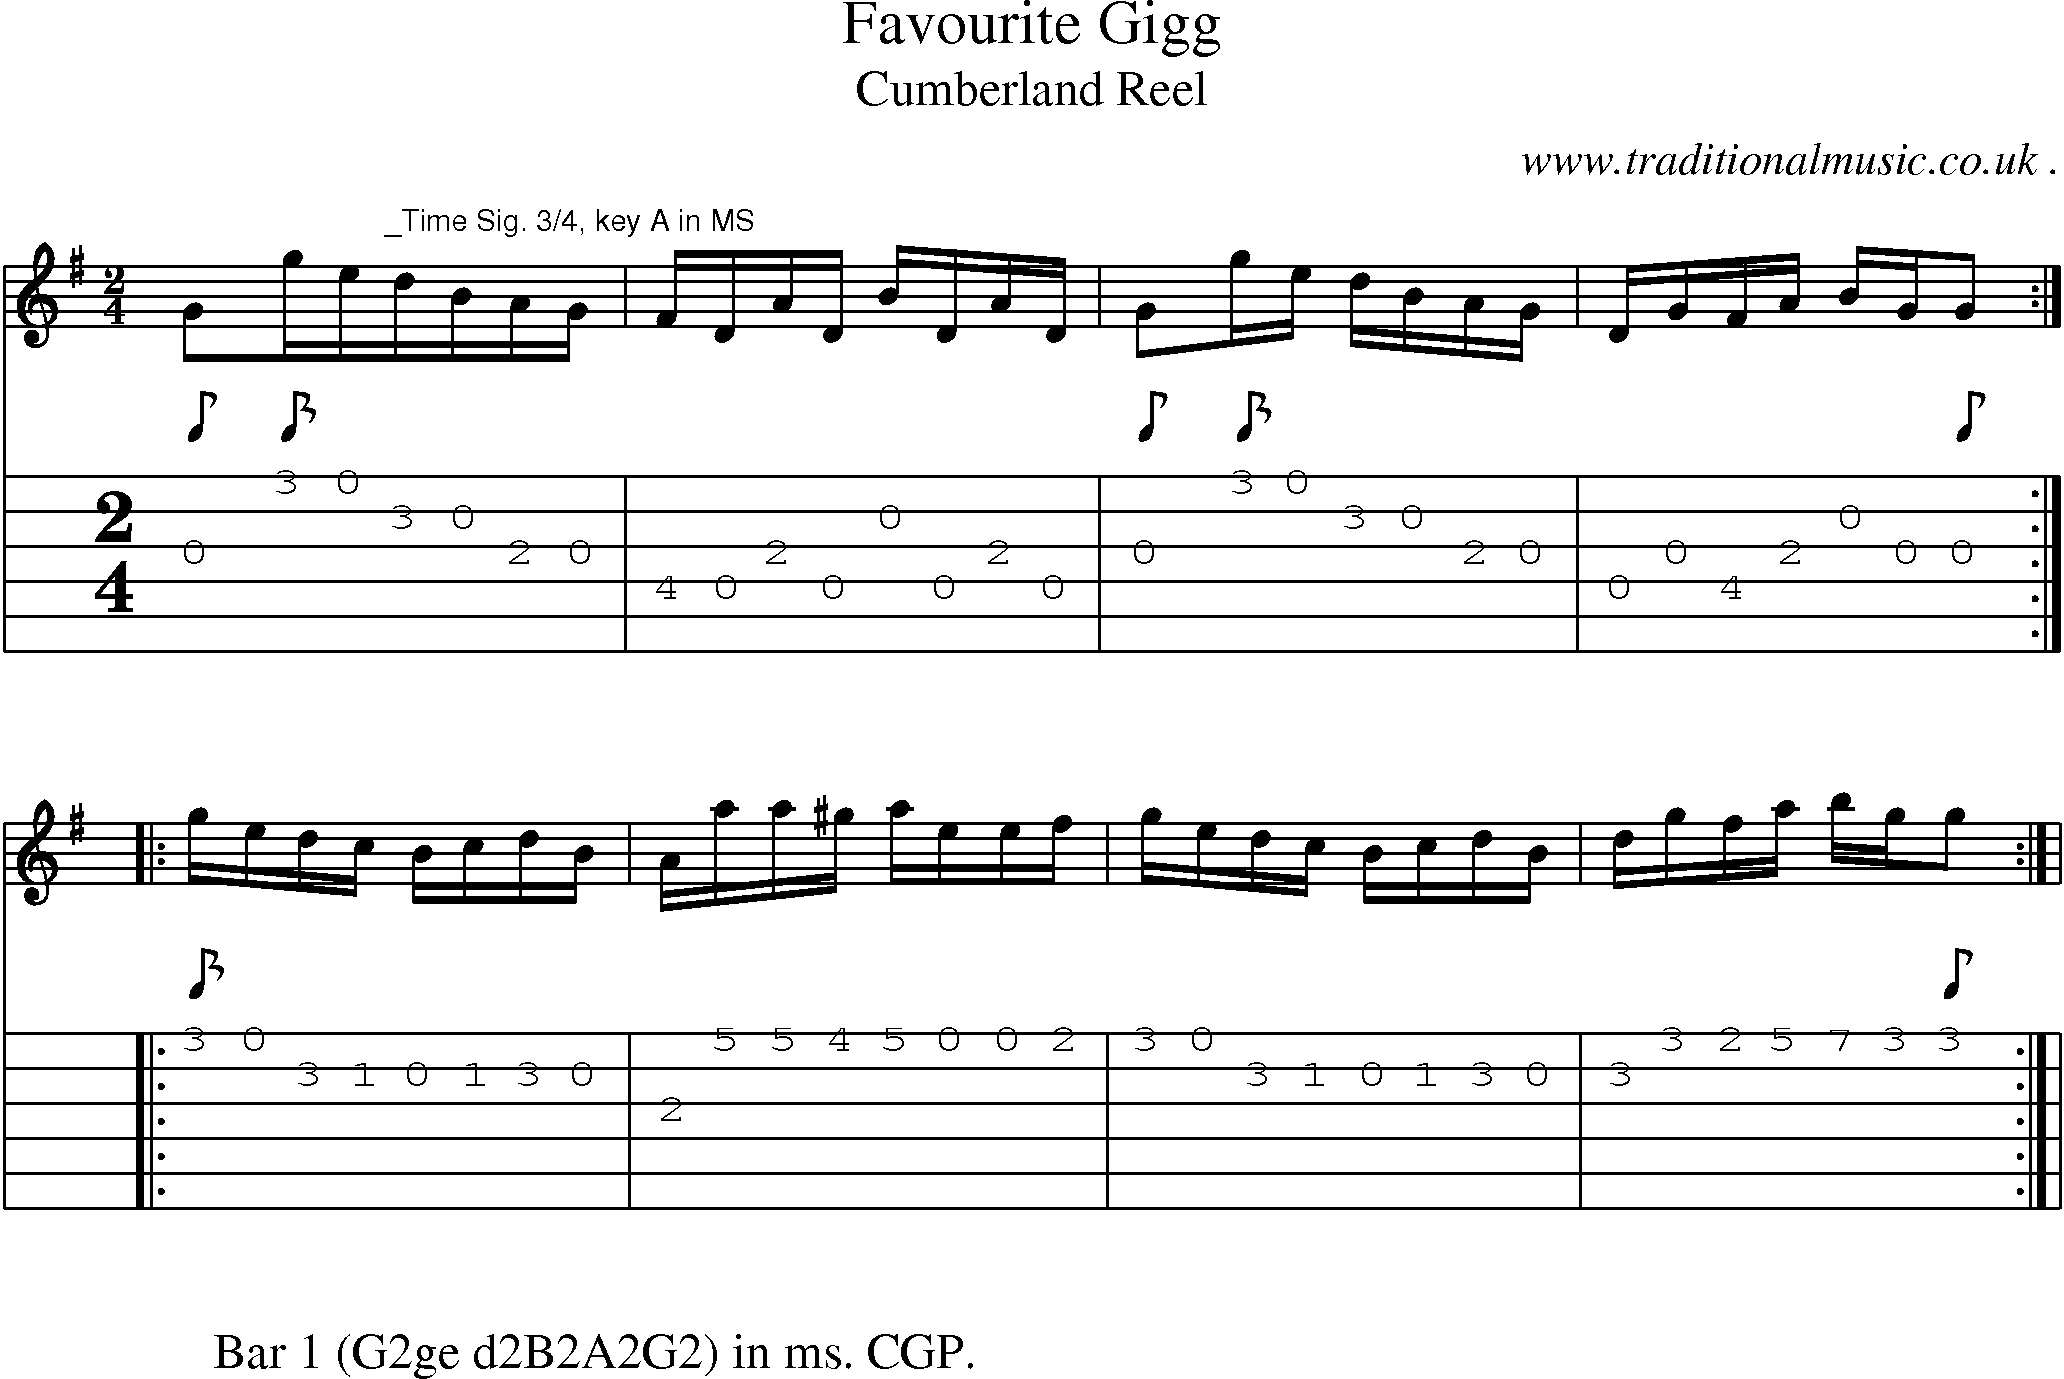 Sheet-Music and Guitar Tabs for Favourite Gigg